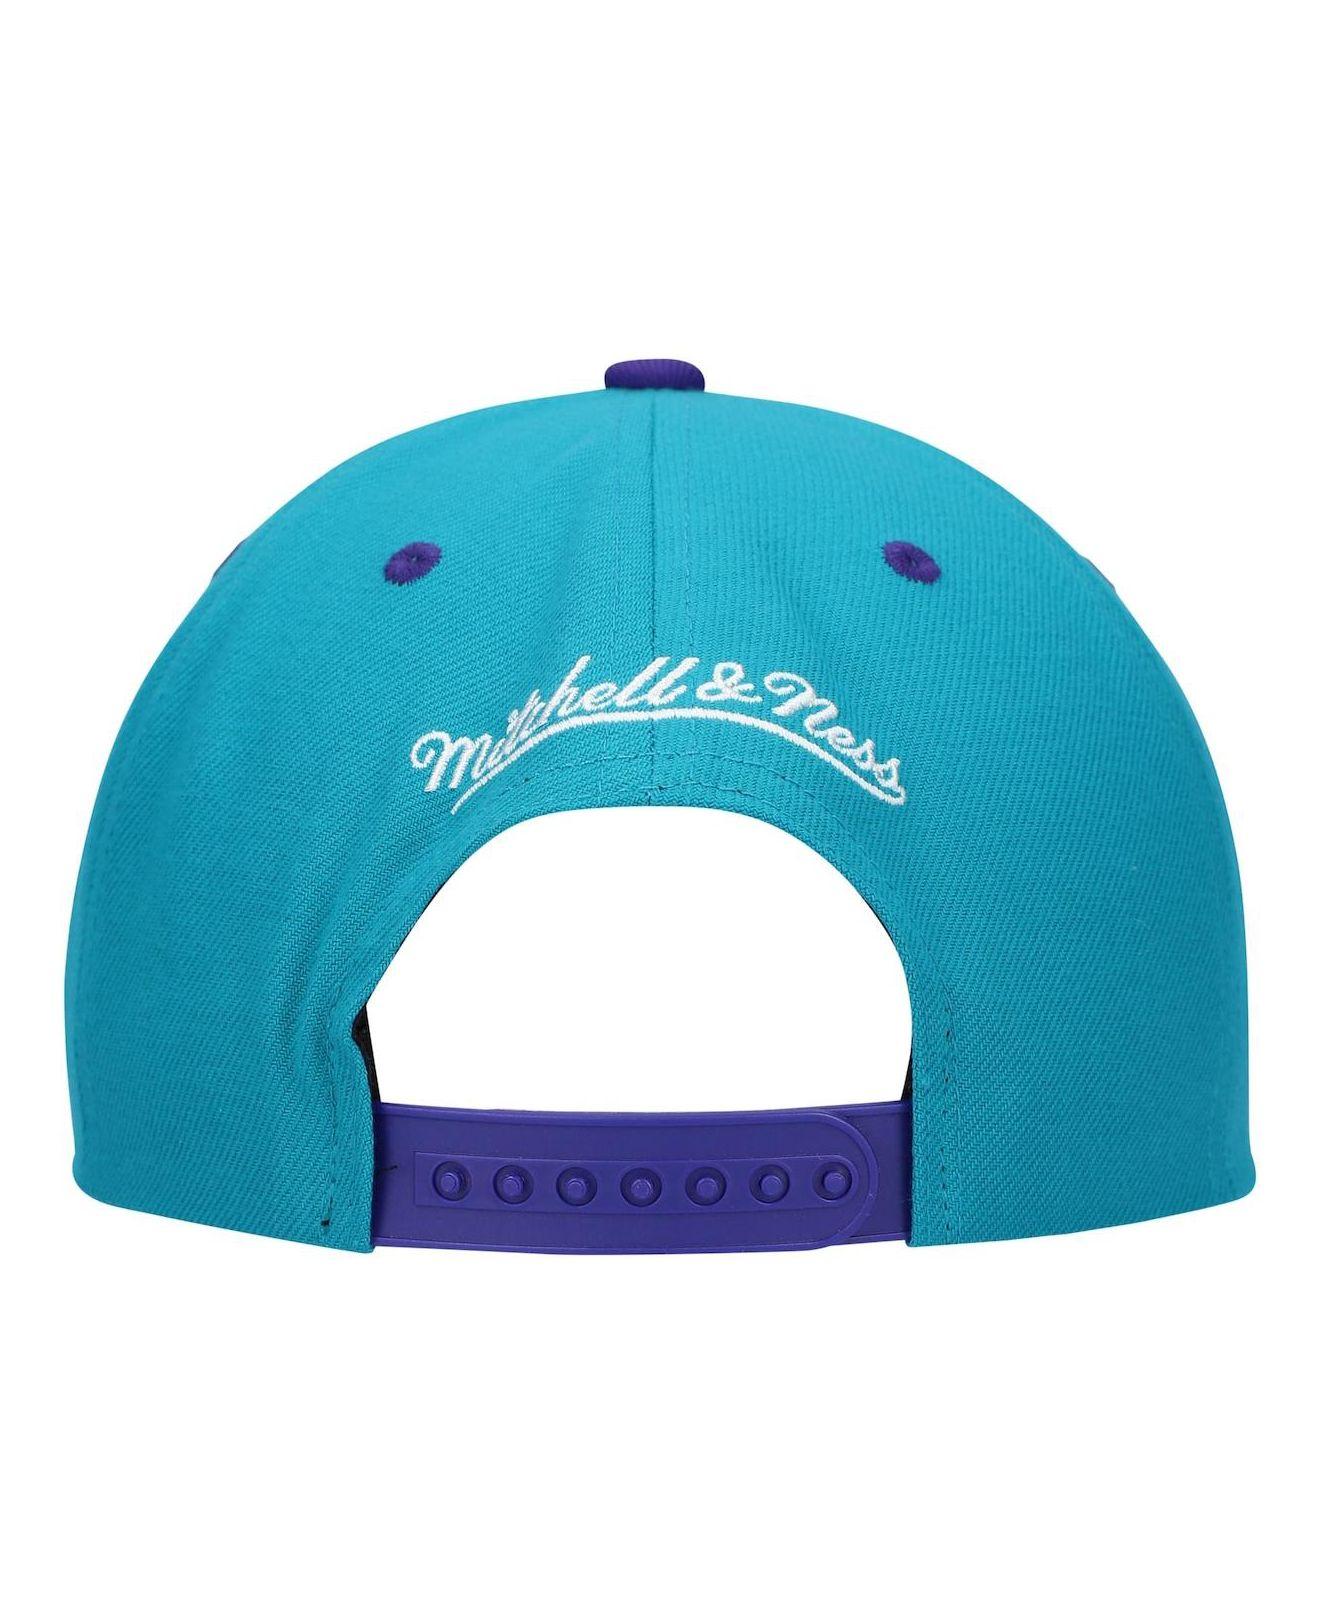 Mitchell and Ness Charlotte Hornets Fitted Hat Black/Yellow